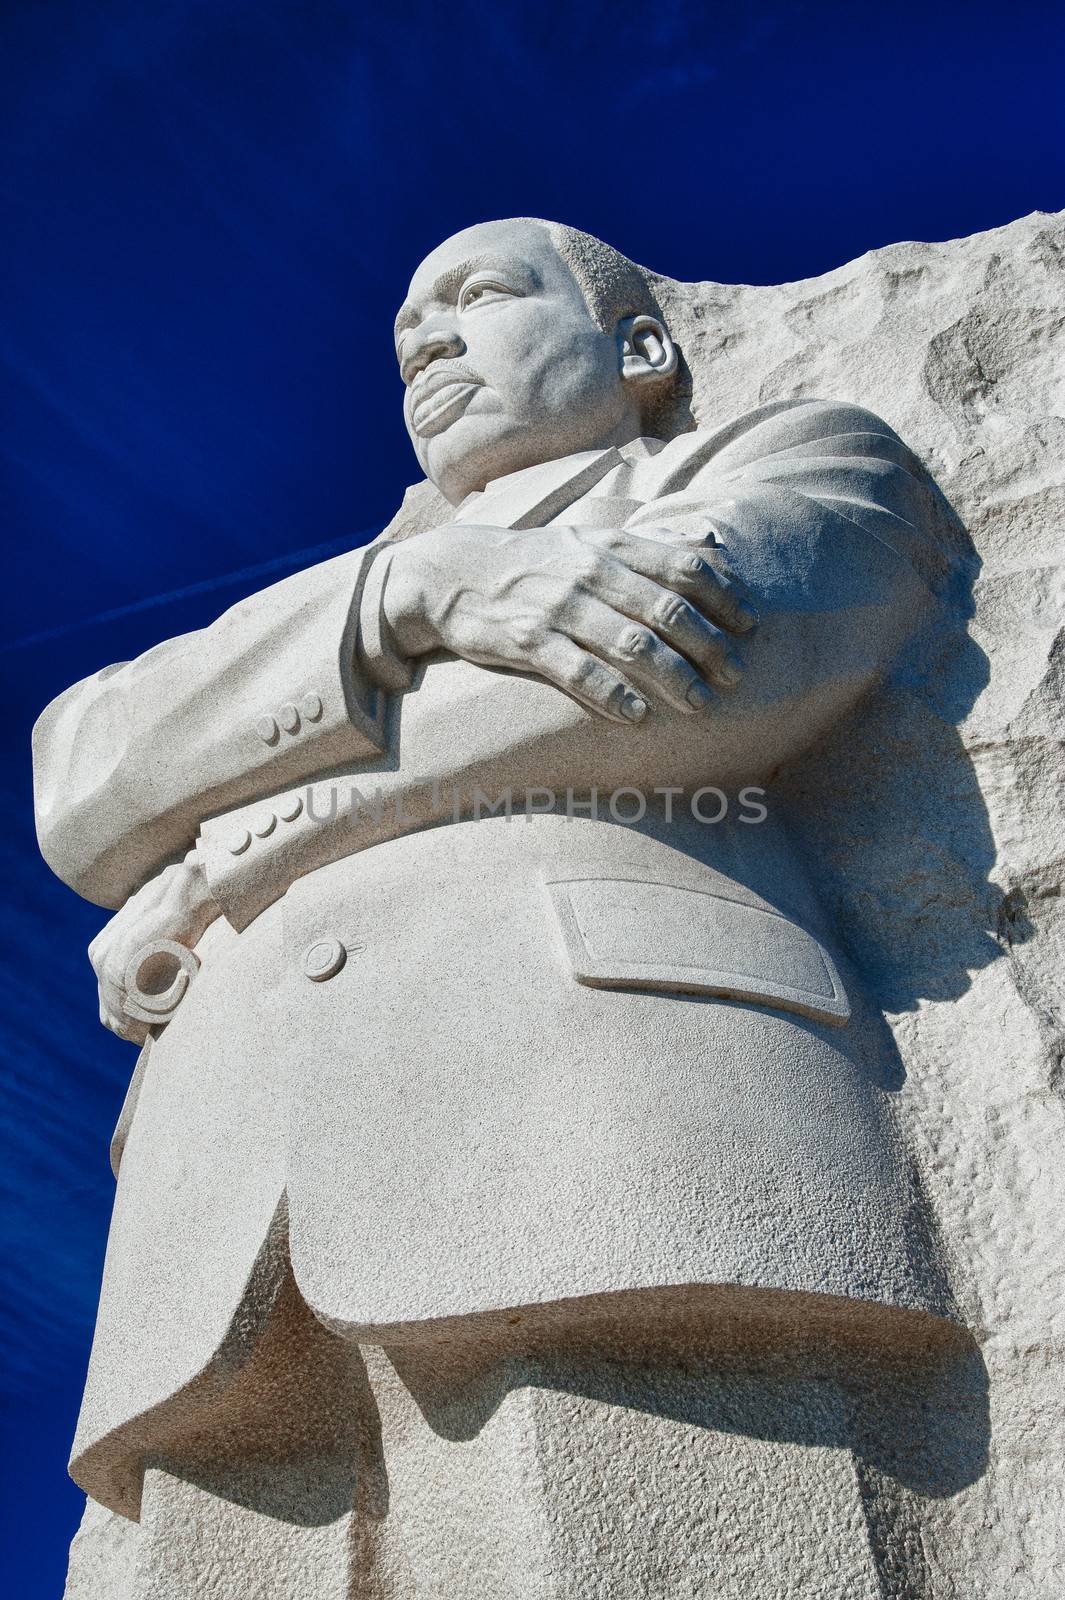 The Martin Luther King, Jr. Memorial statue, located in West Potomac Park in Washington, D.C., USA.